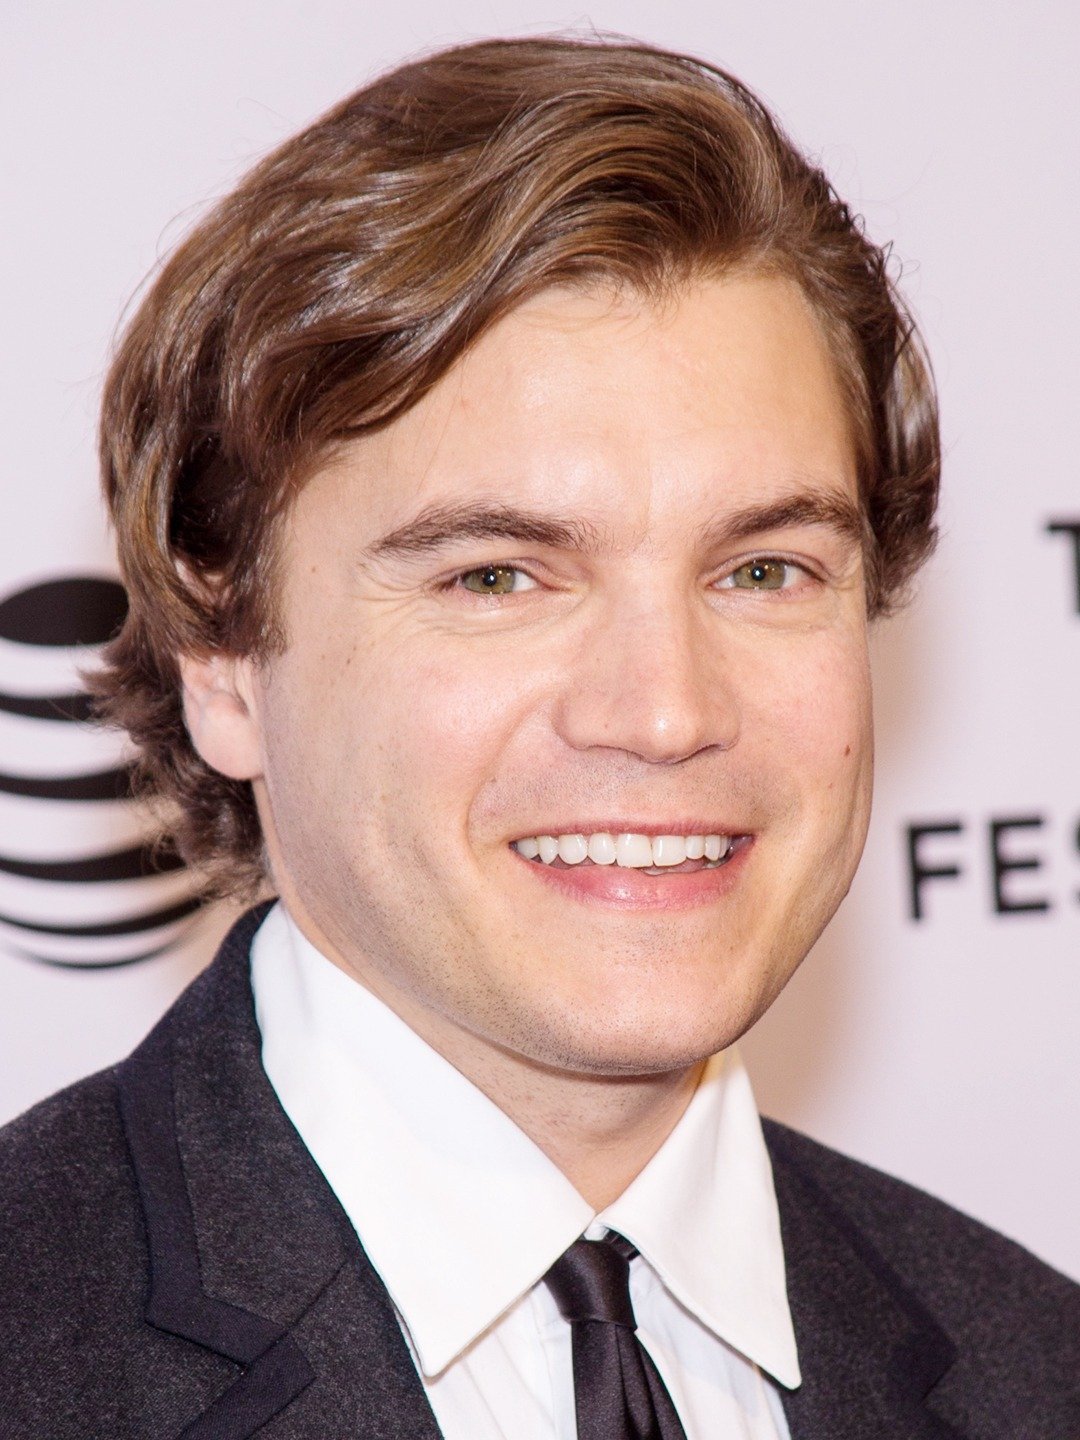 How tall is Emile Hirsch?